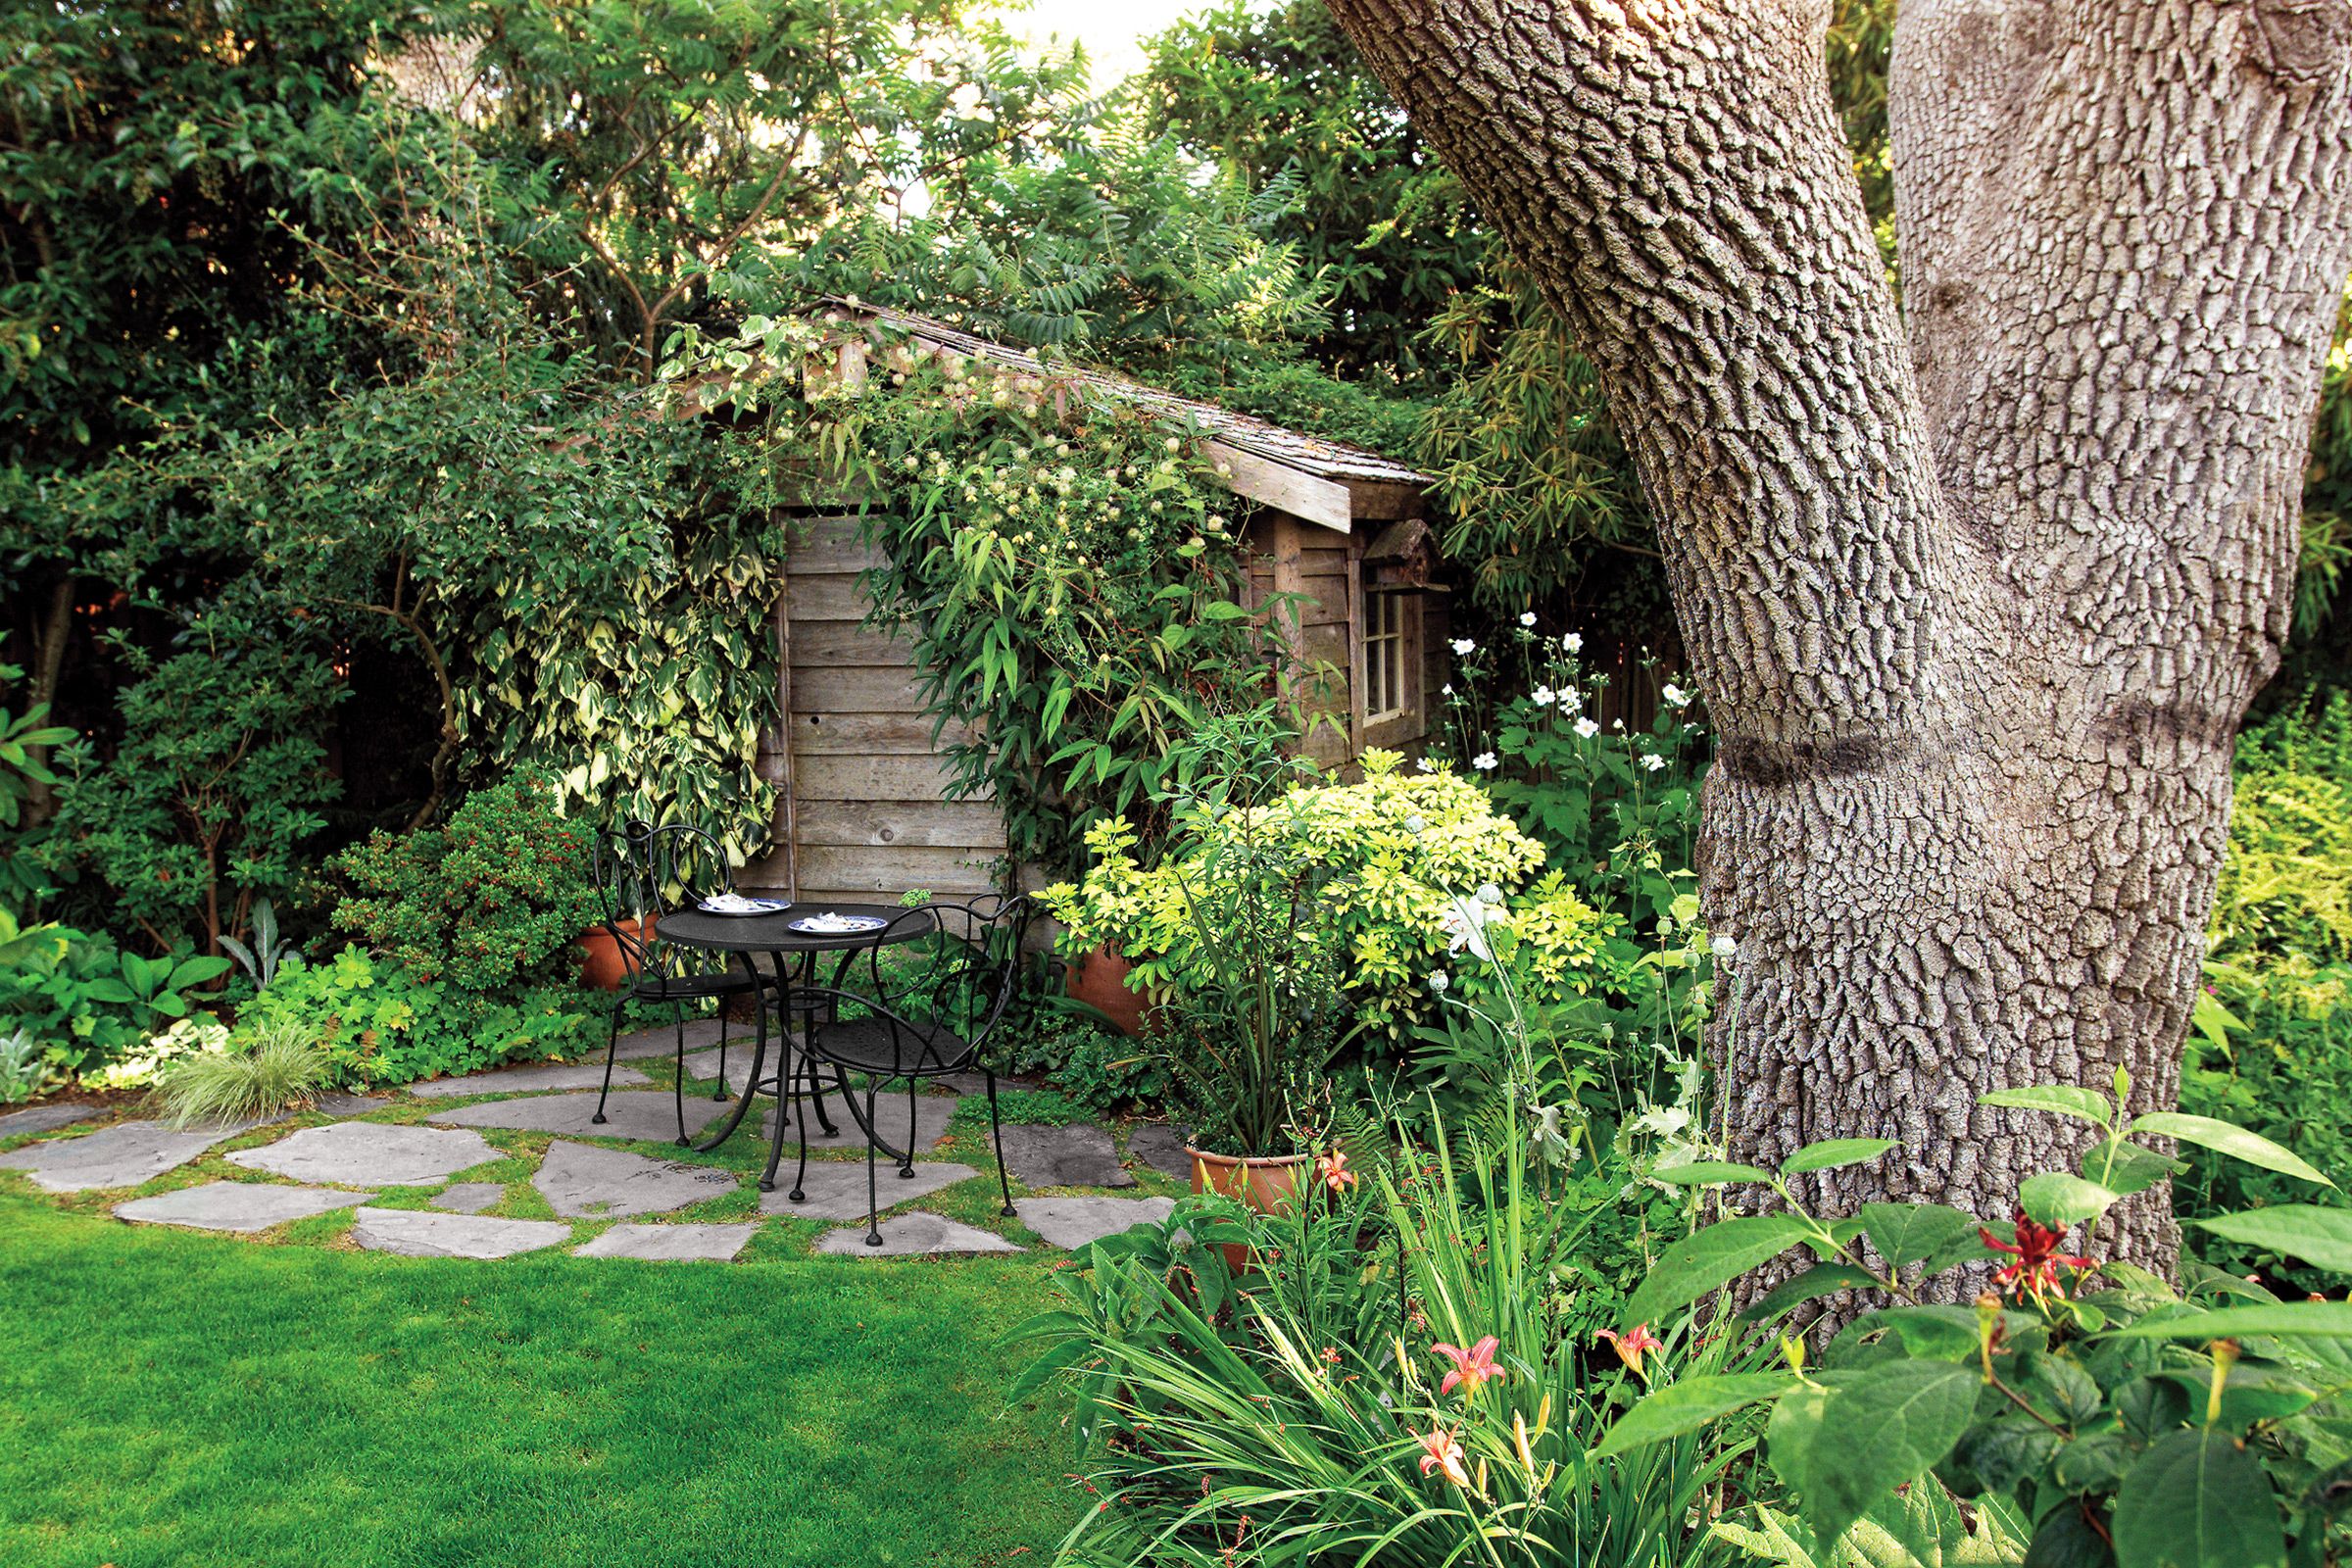 How to create the ultimate outdoor room that you can enjoy all year round